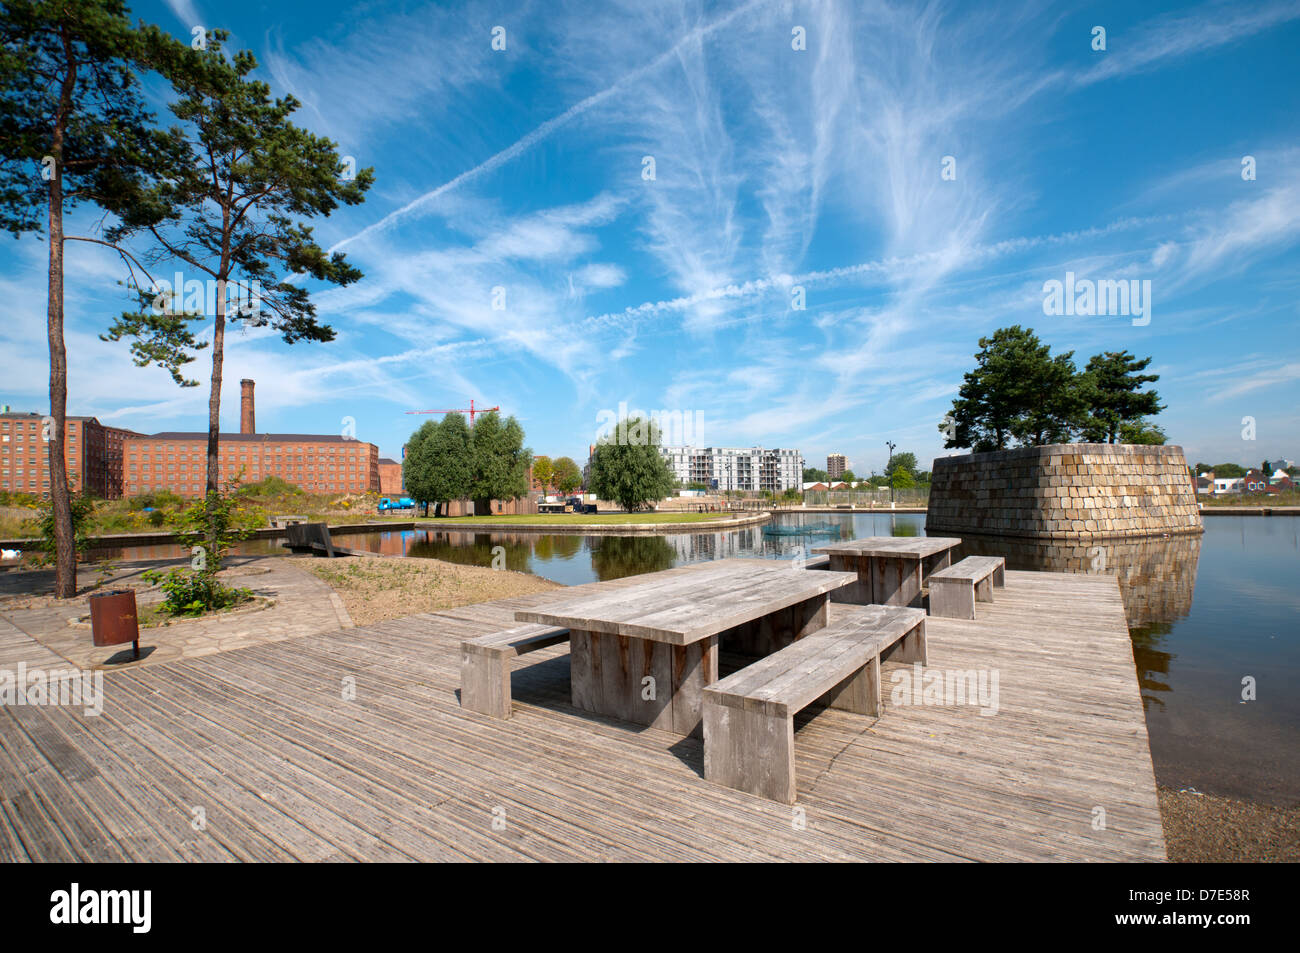 Cirrus clouds and picnic benches at the Cotton Field Park marina, New Islington, Ancoats, Manchester, England, UK Stock Photo